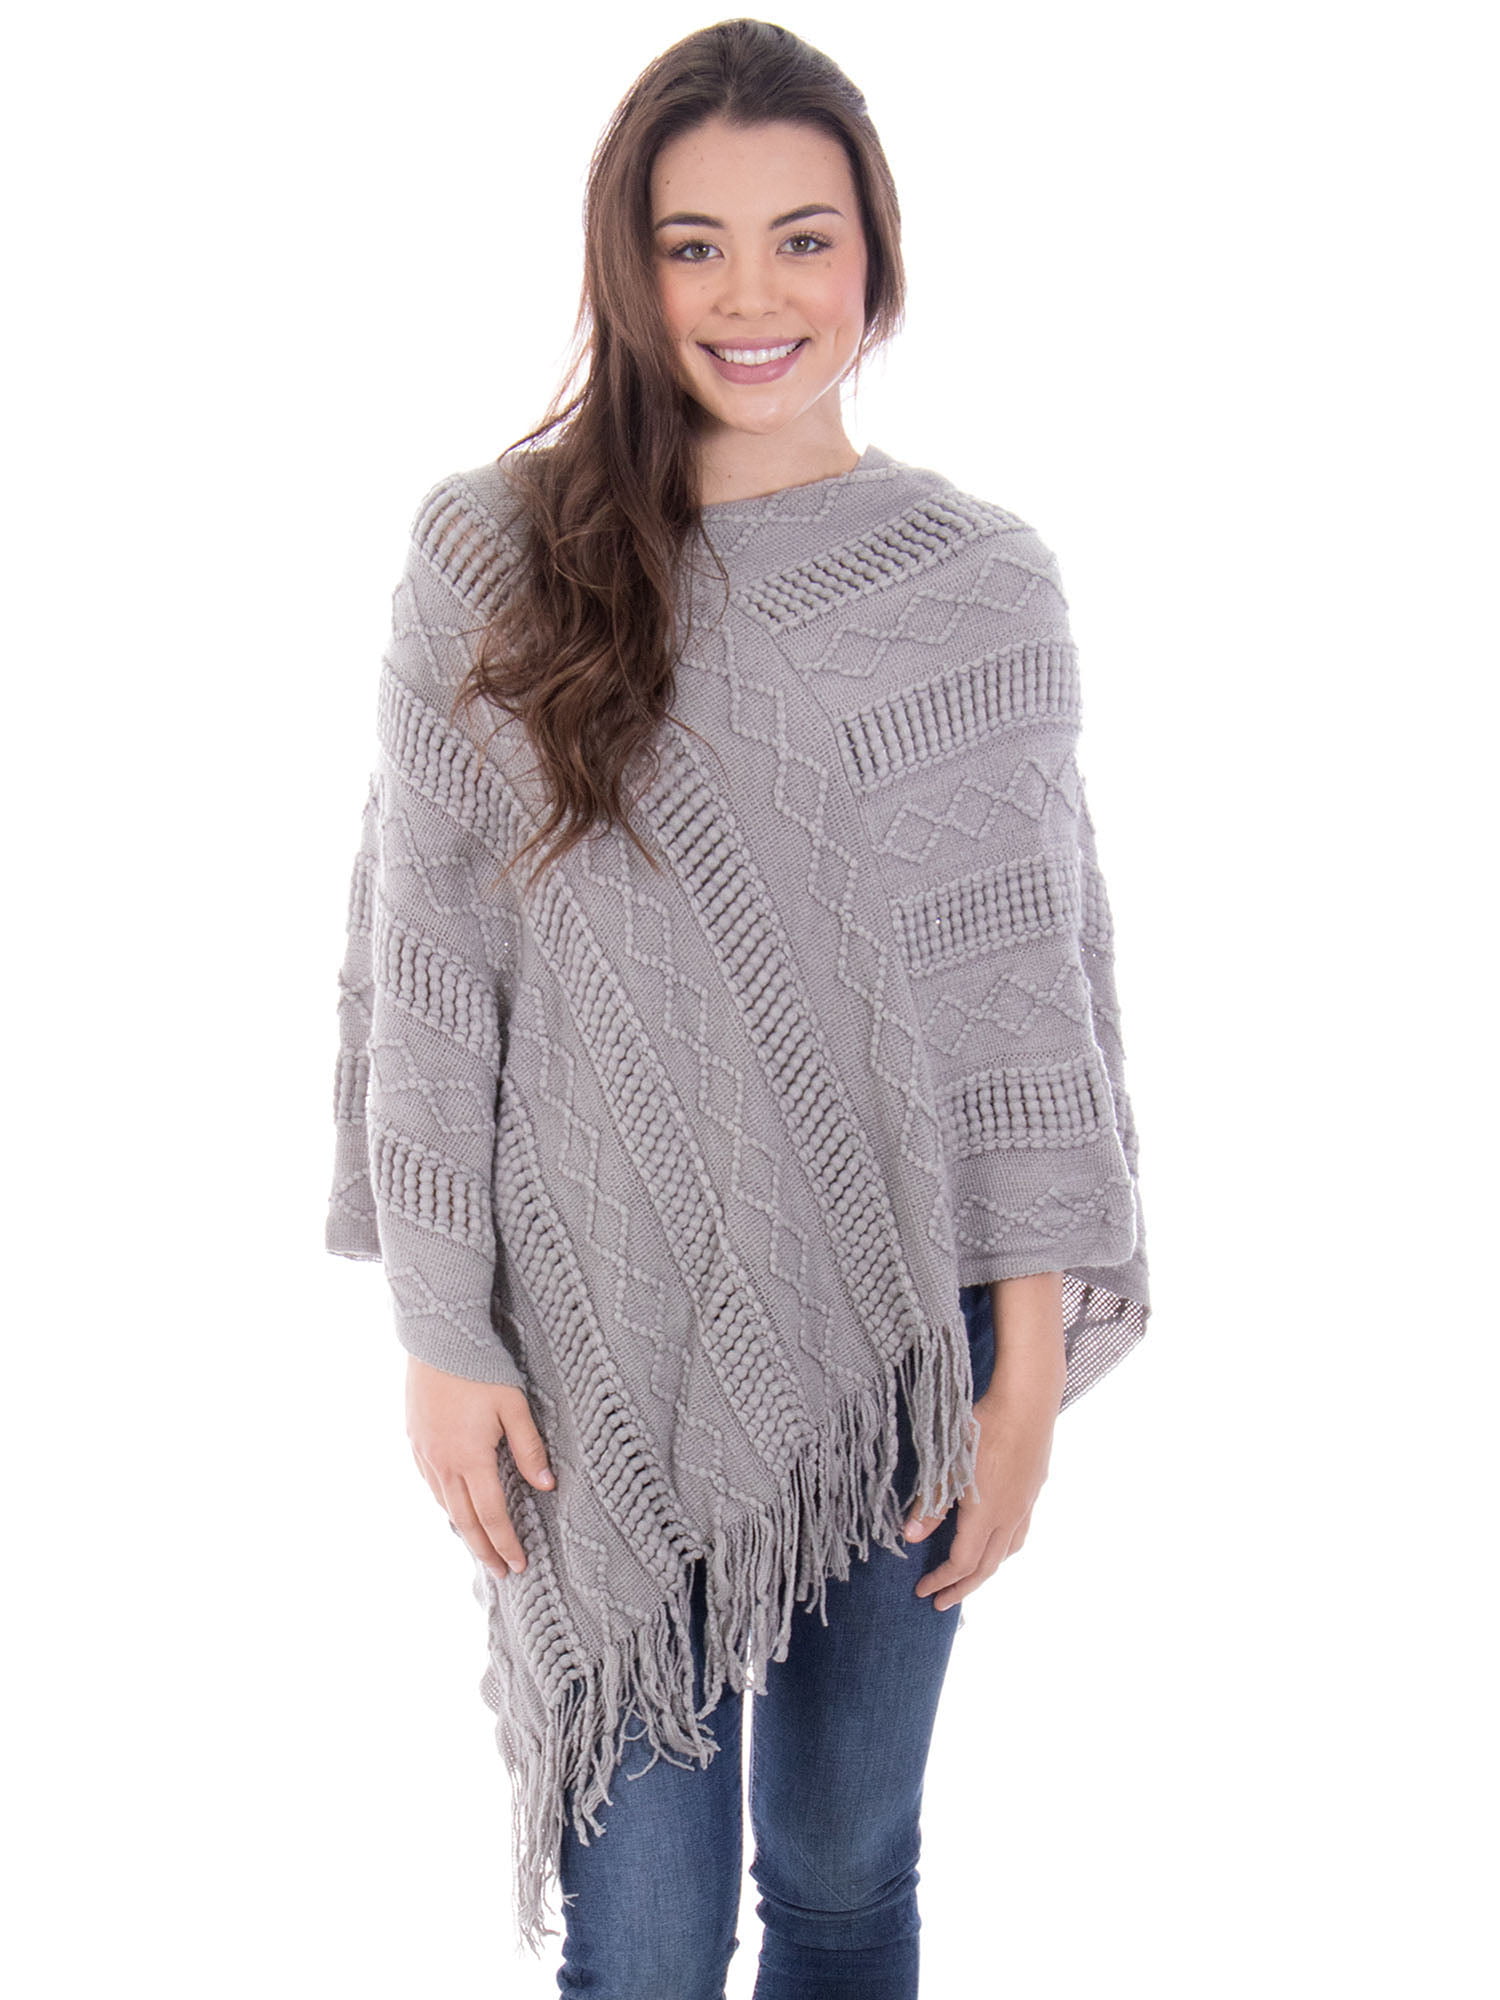 Simplicity Women's Batwing Knitted Tassel Pullover Sweater Poncho Shawl ...